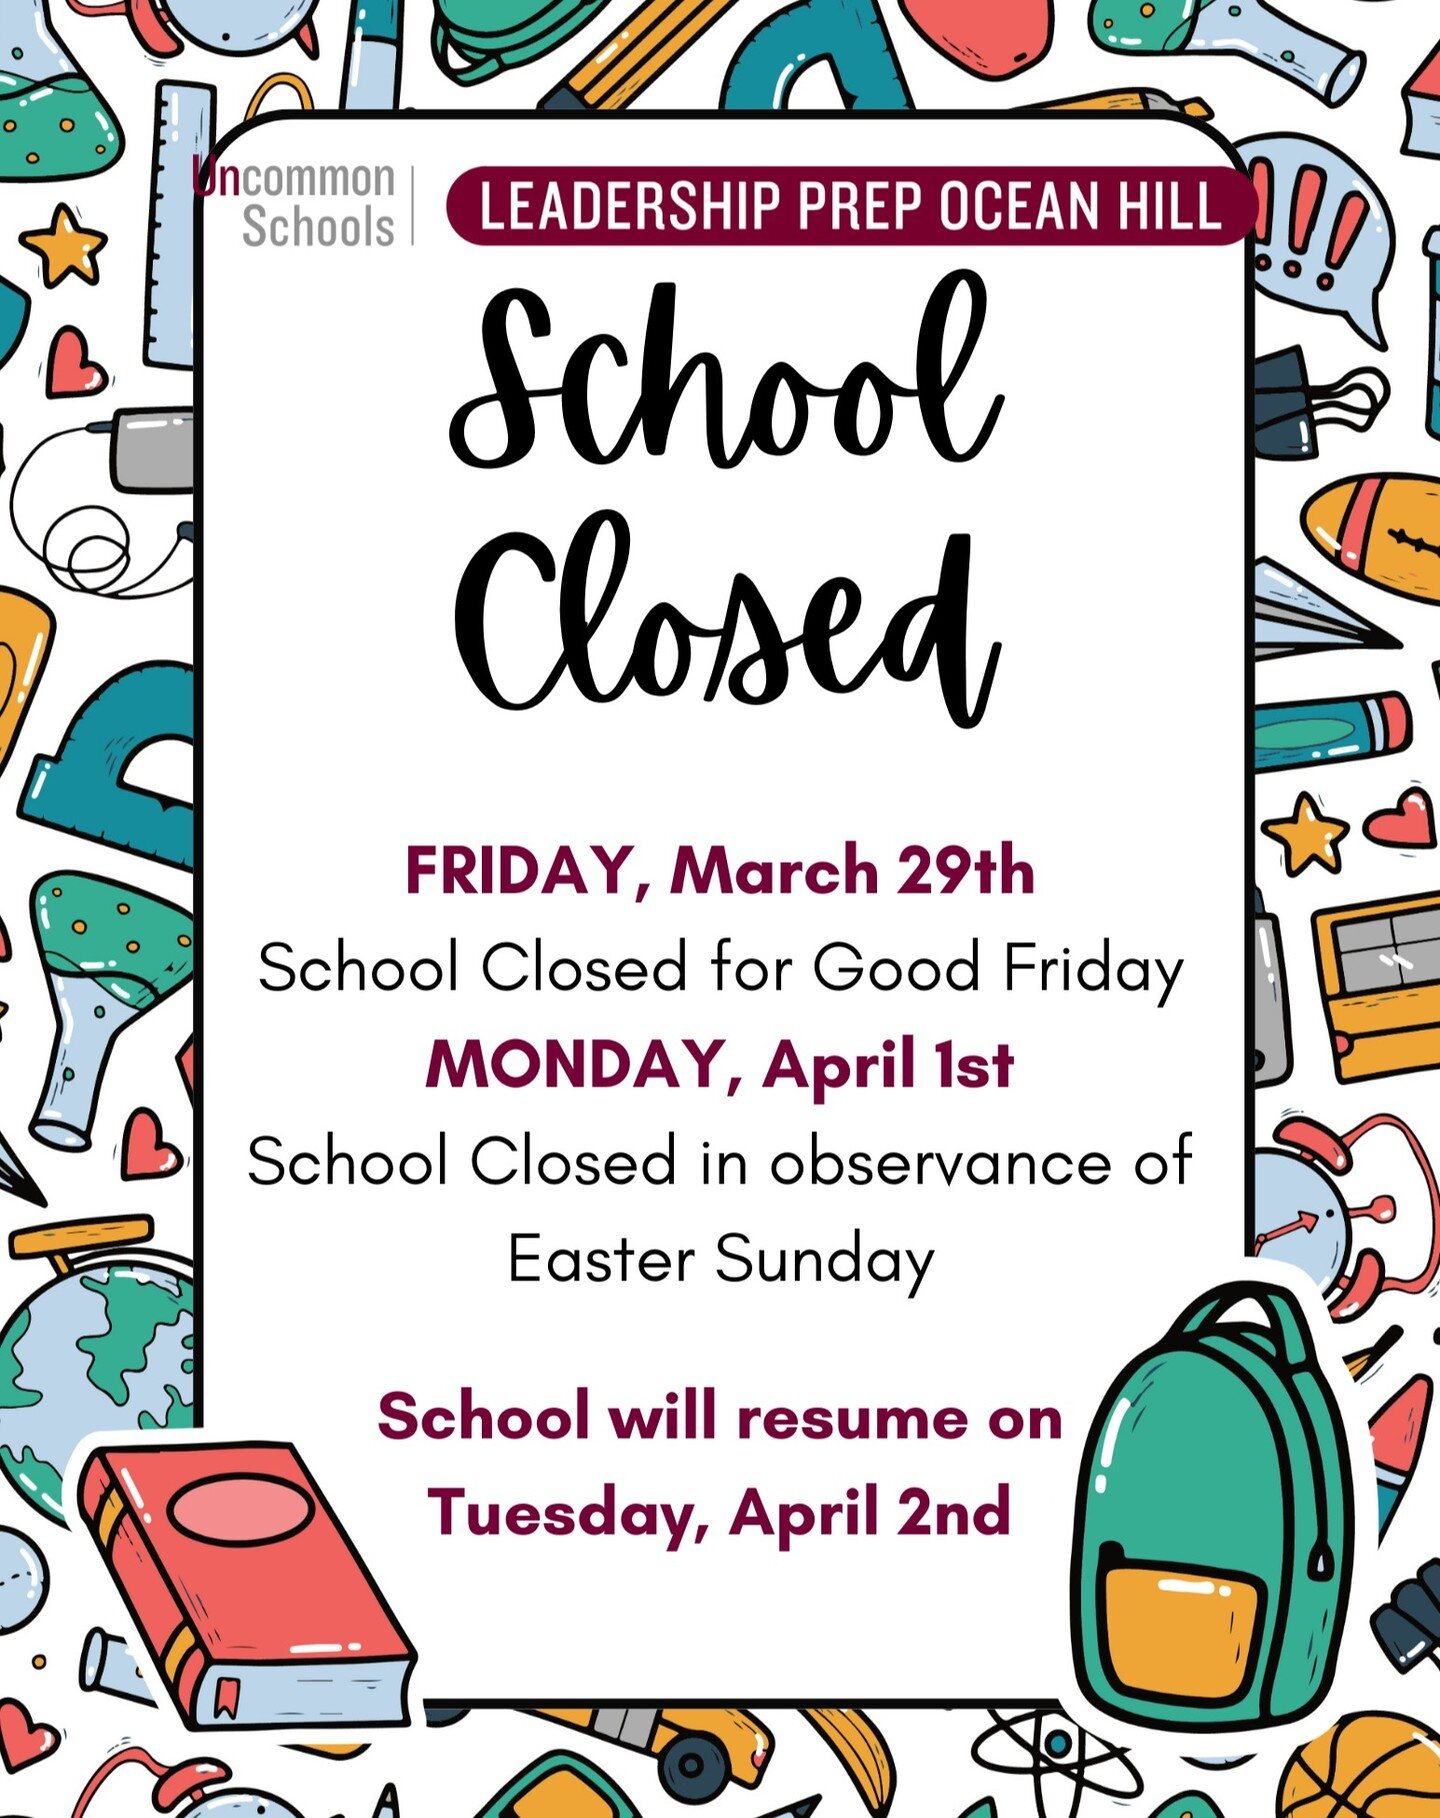 You could say:

📅 #SaveTheDate 📅

School will be closed on Friday, March 29th and Monday, April 1st, providing scholars with a 4-day weekend! Classes will resume on Tuesday, April 2nd.